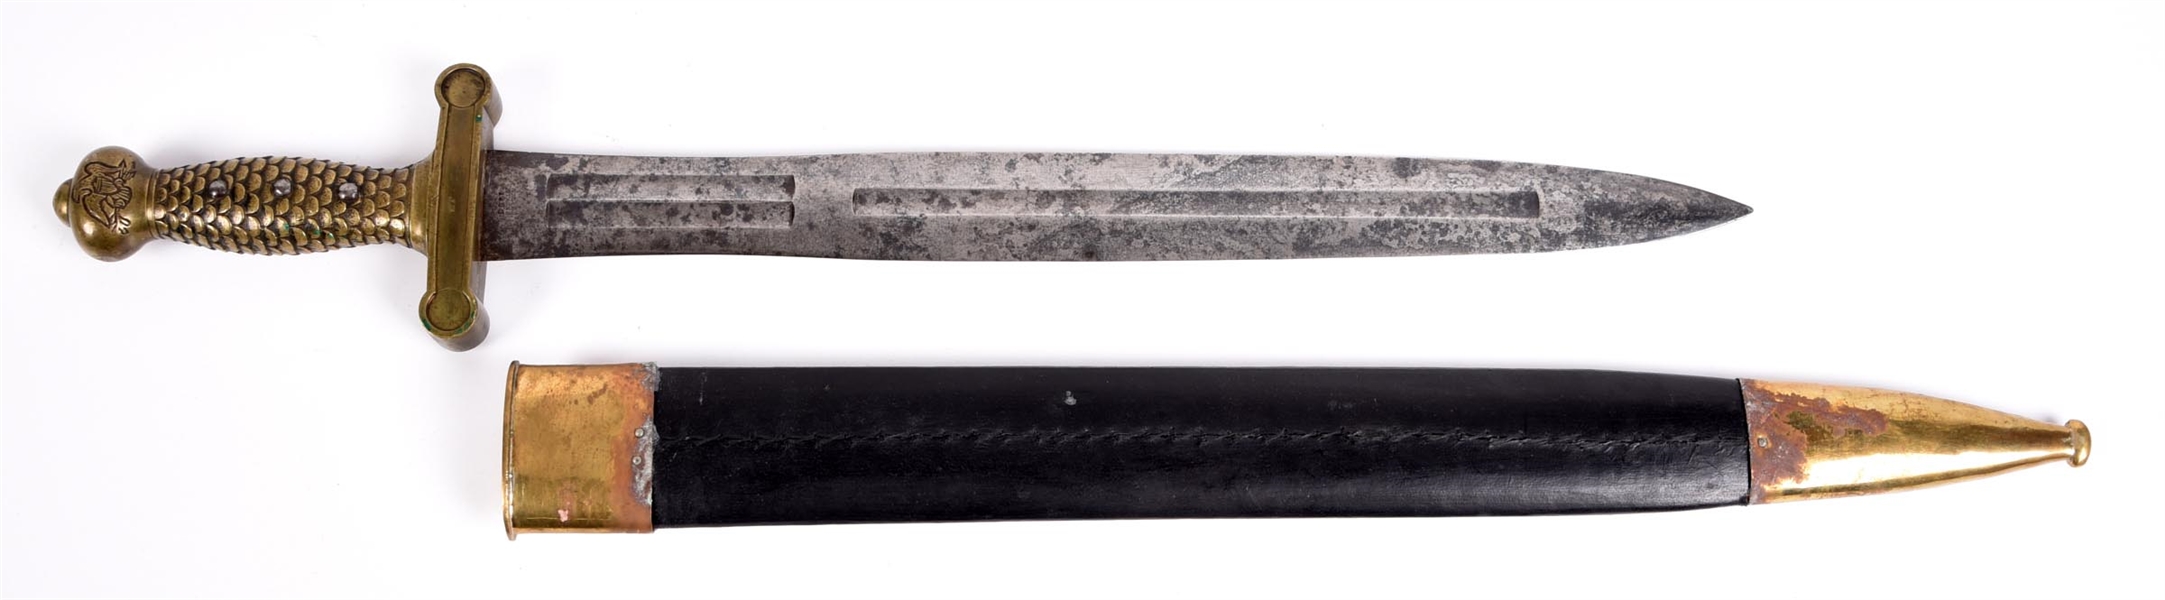 US 1832 FOOT ARTILLERY SHORT SWORD WITH EARLY PRODUCTION DATE.